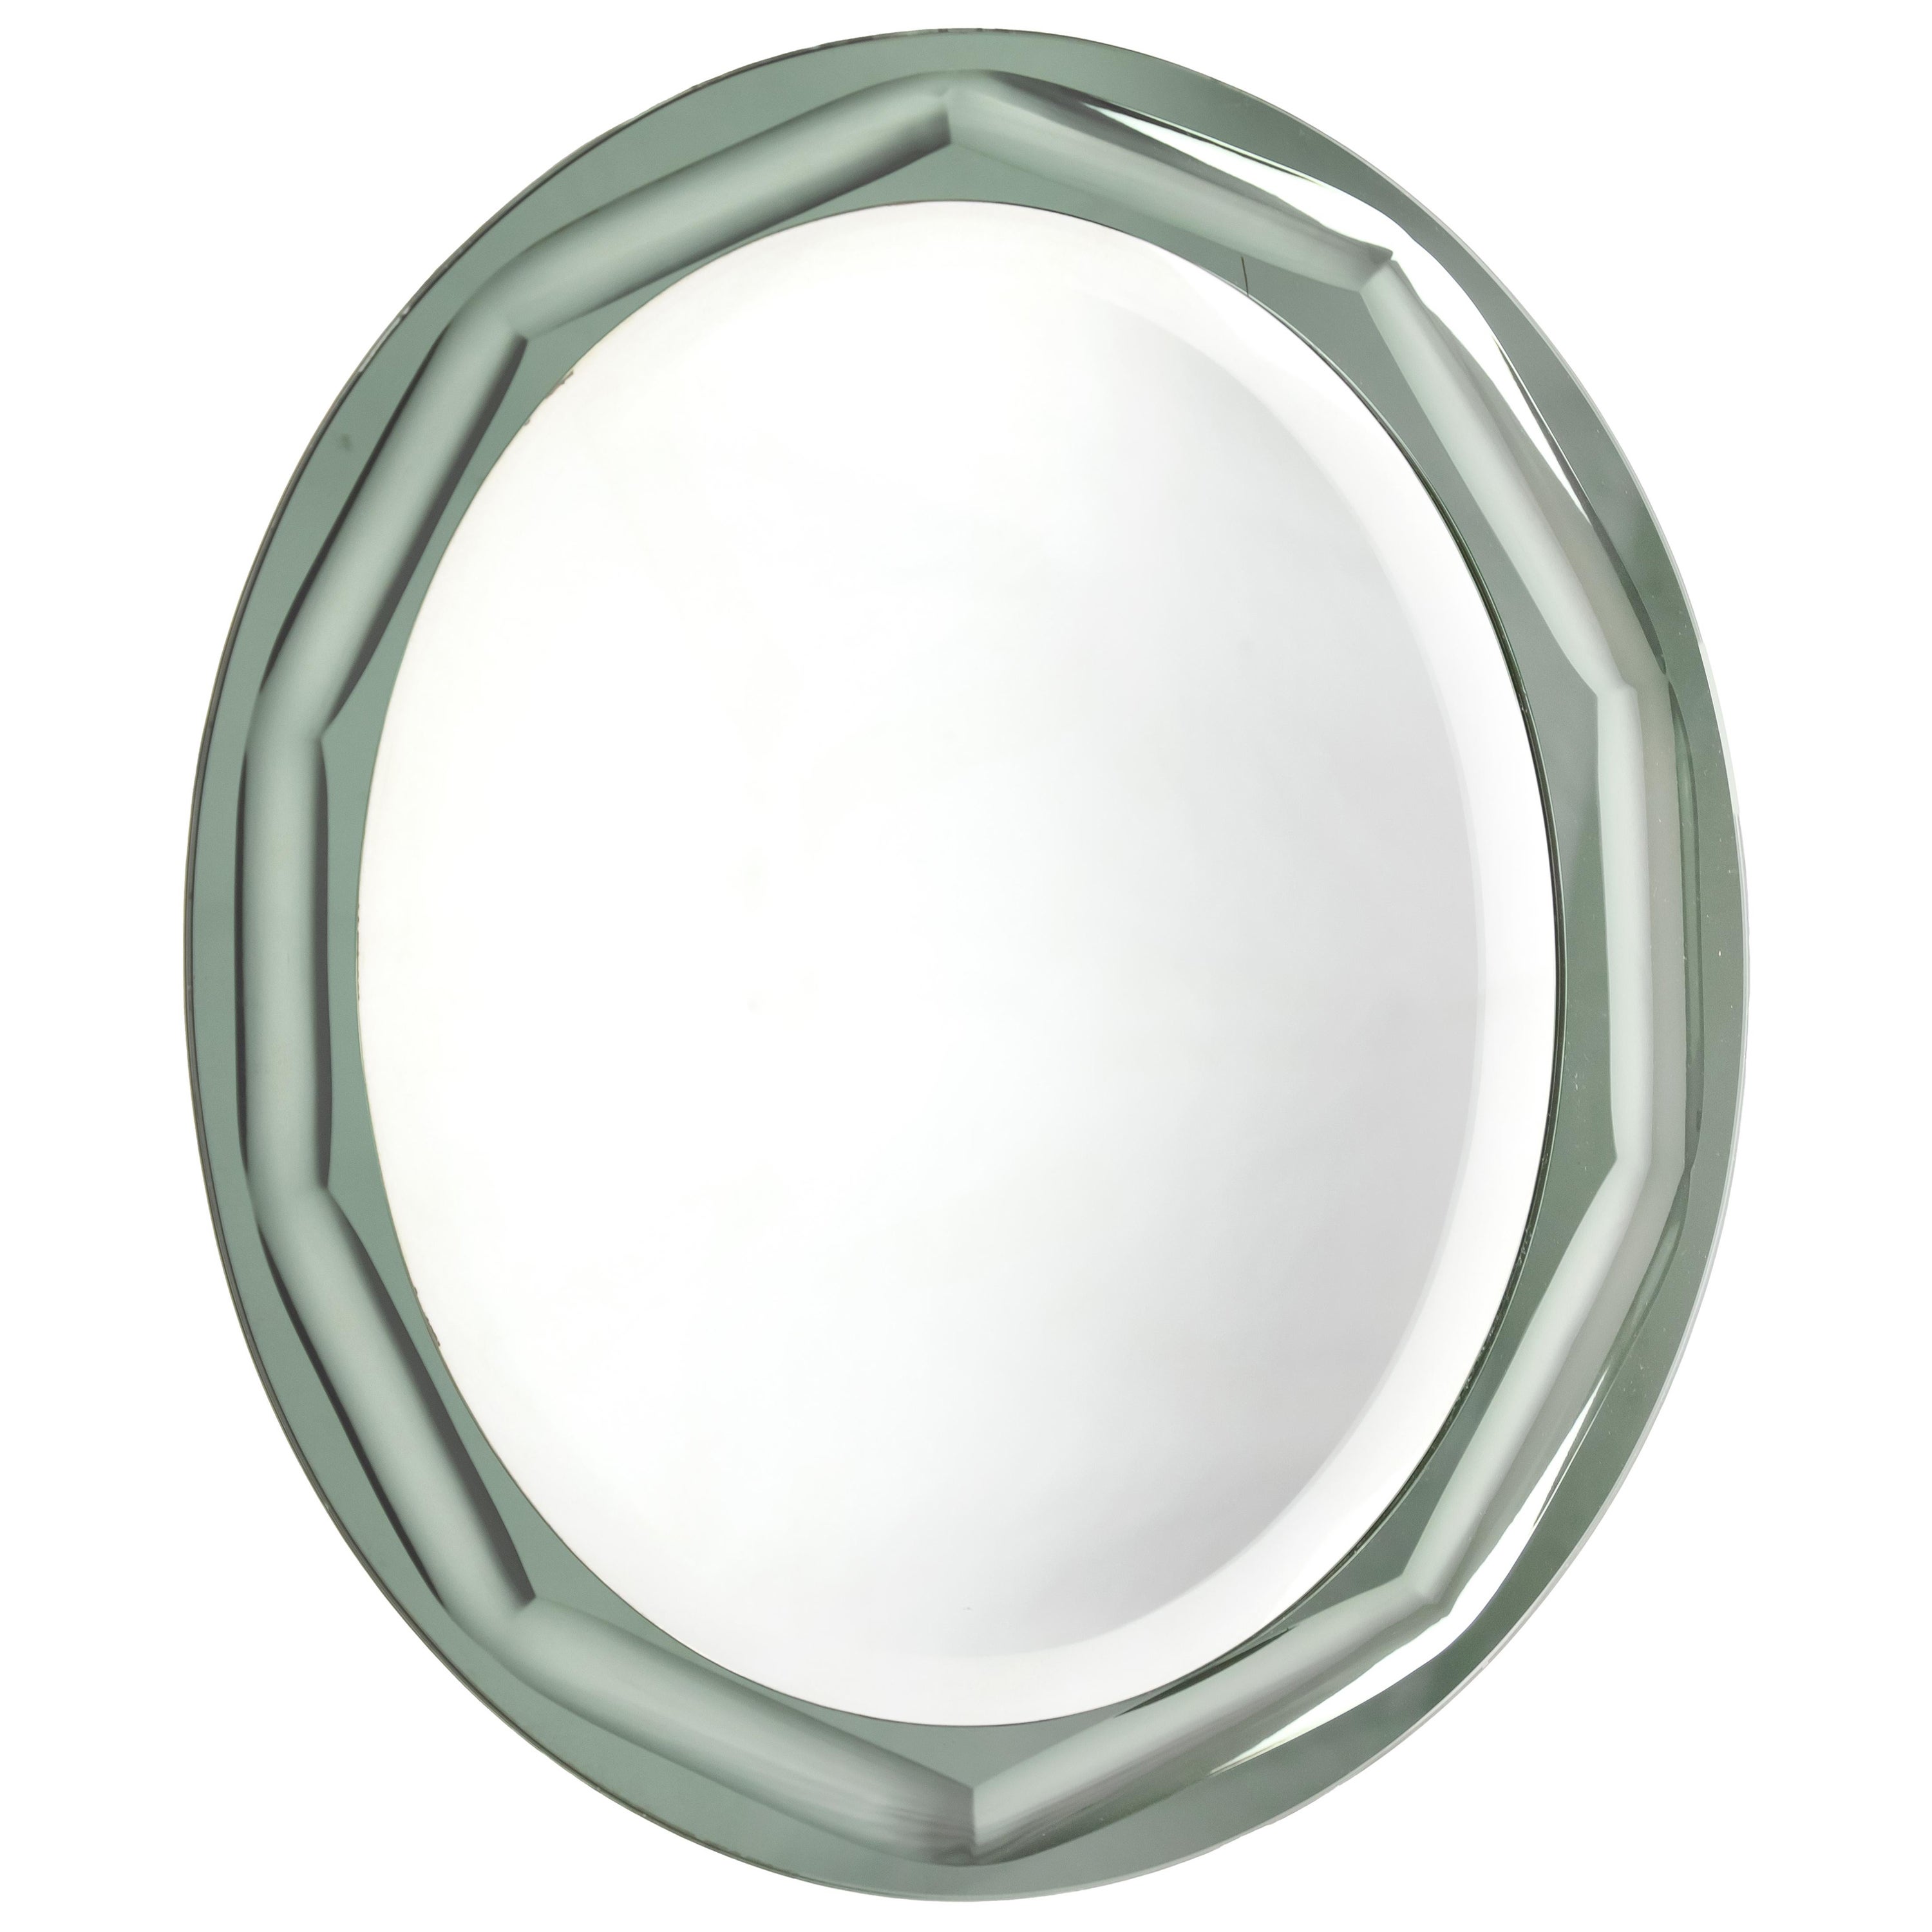 Vintage Oval Mirror by Lupi Cristal-Luxor, Italy 1970s